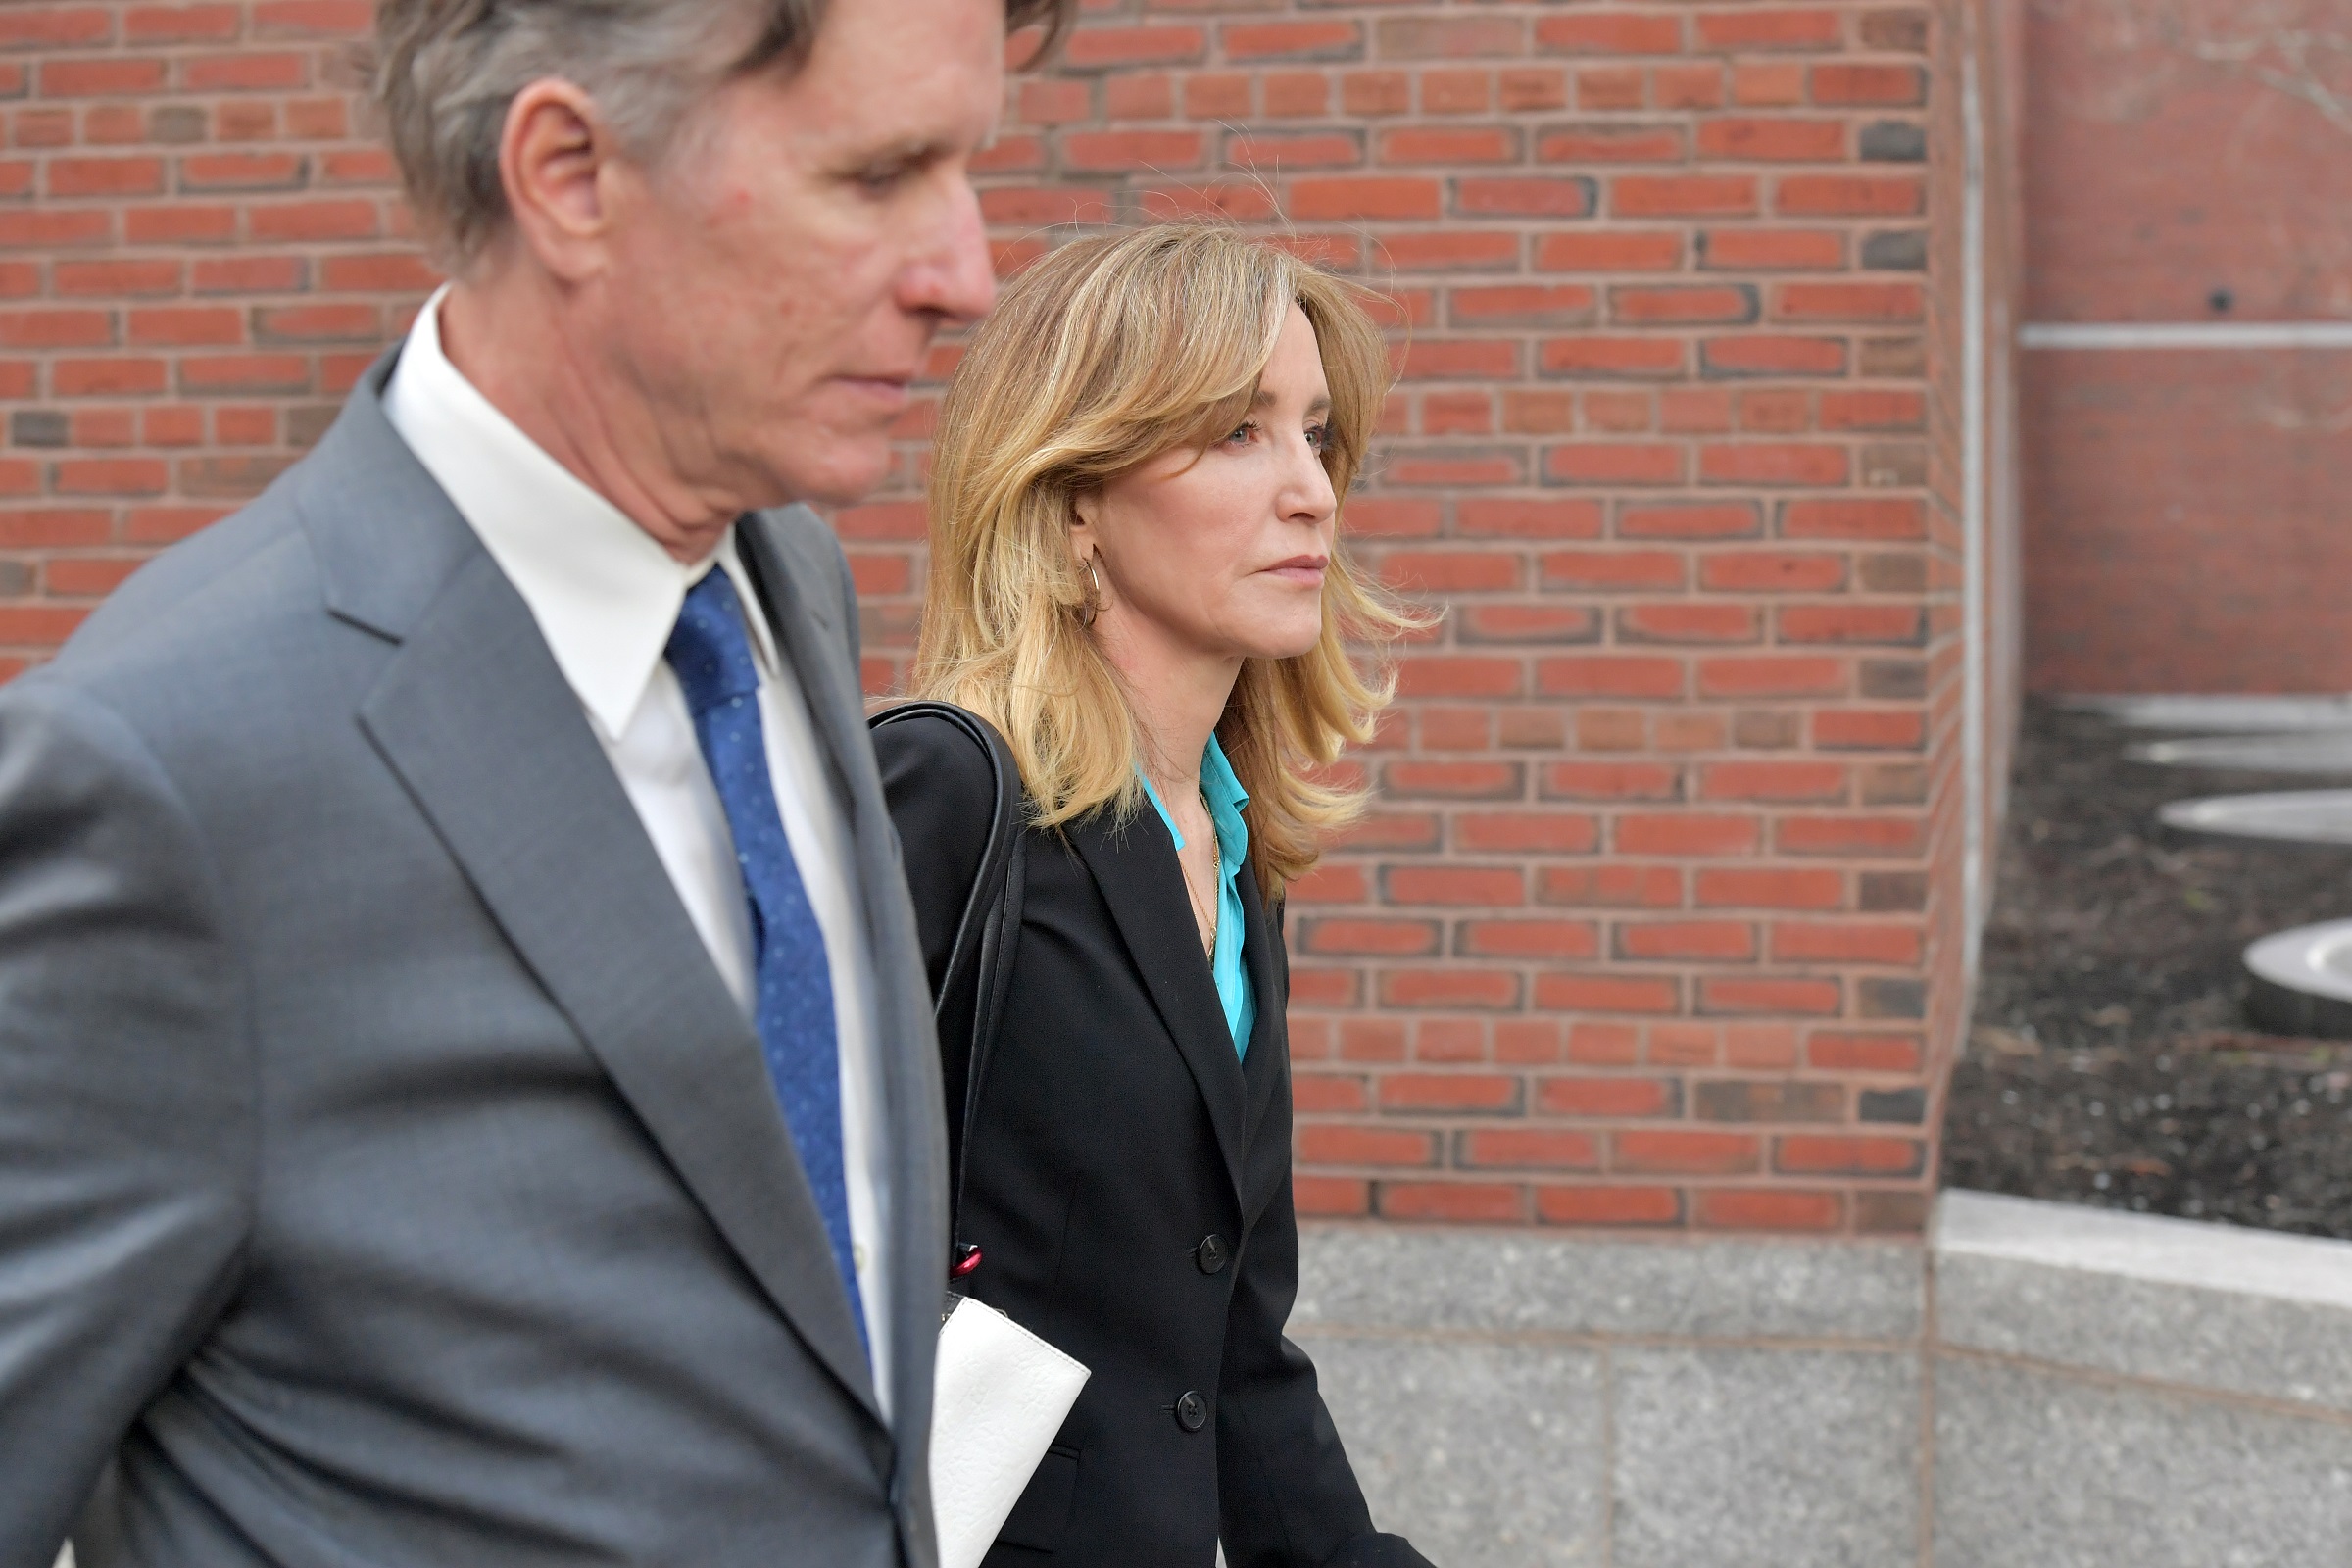 BOSTON, MA - APRIL 03:  Felicity Huffman exits the John Joseph Moakley U.S. Courthouse after appearing in Federal Court to answer charges stemming from college admissions scandal on April 3, 2019 in Boston, Massachusetts.  (Photo by Paul Marotta/Getty Images)